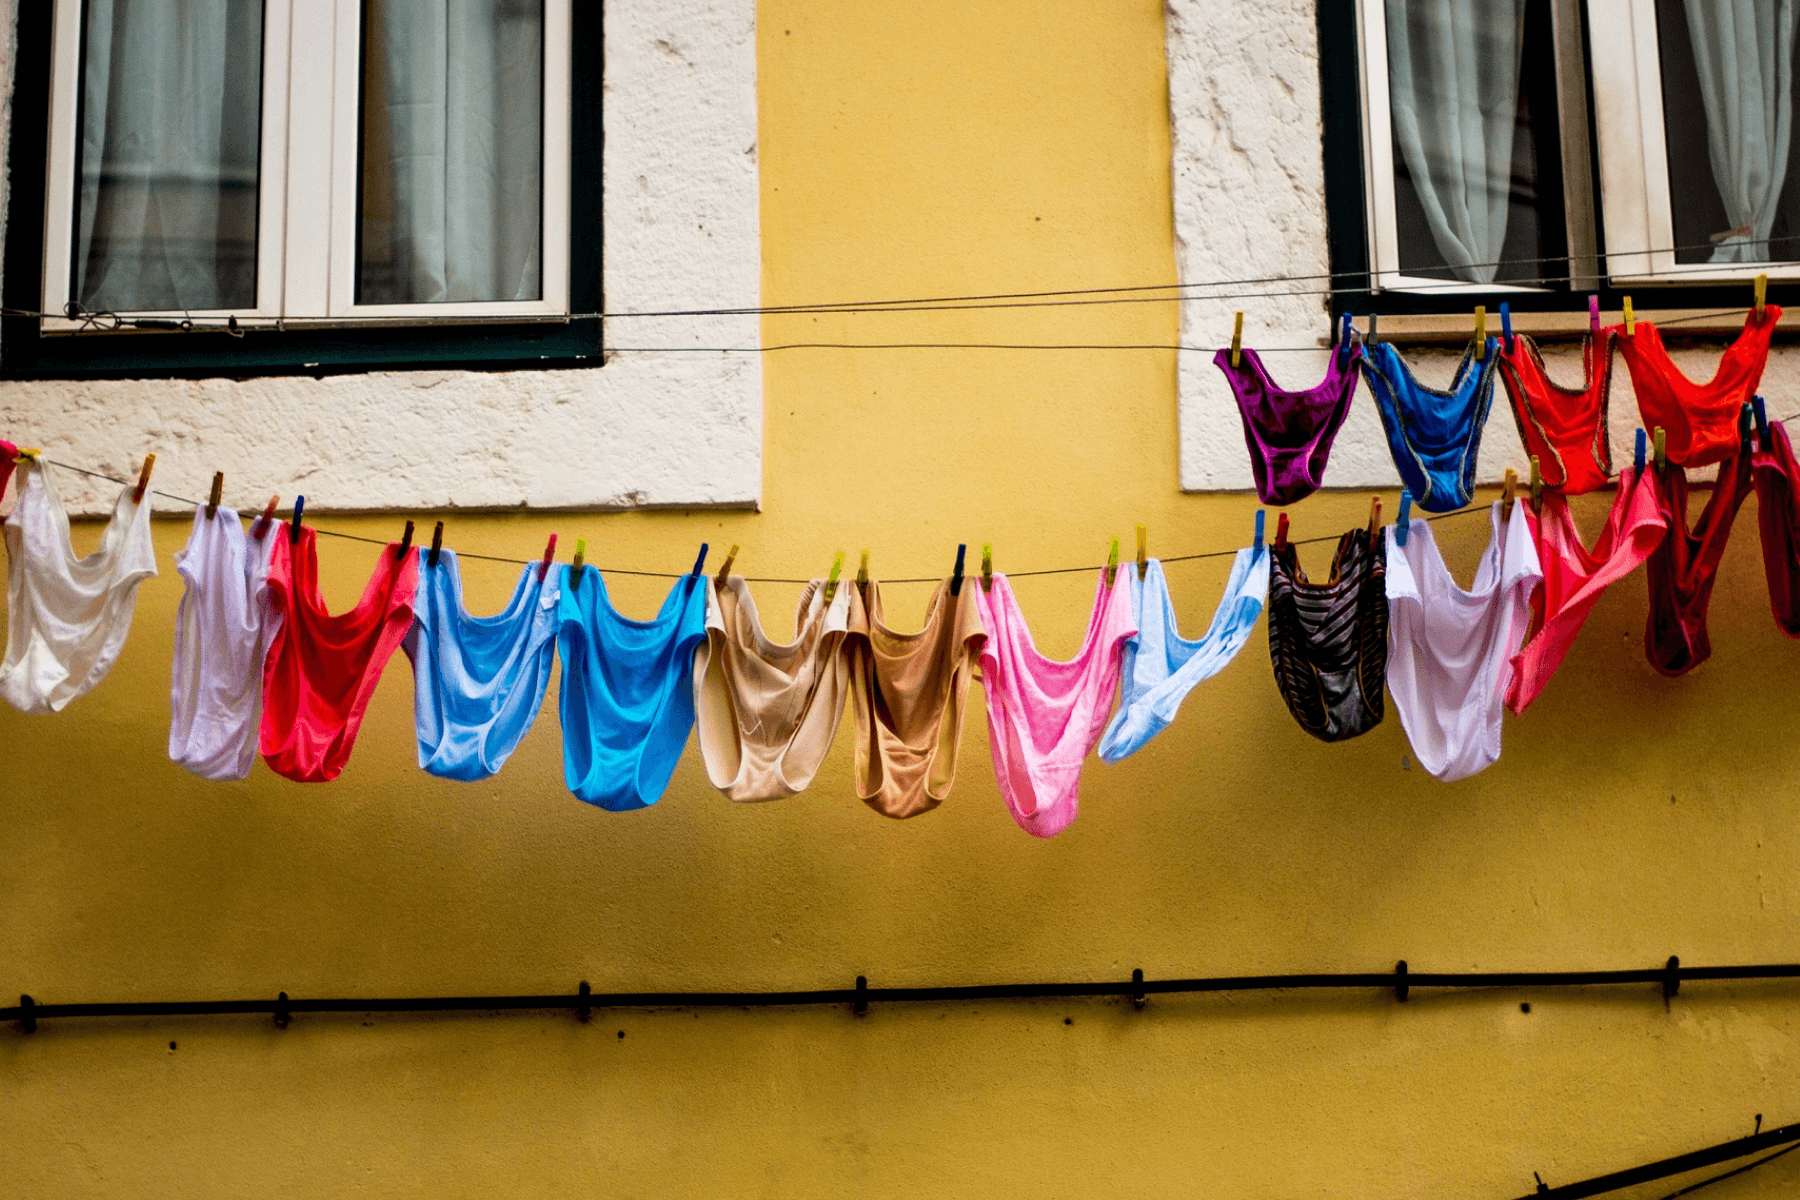 Many pairs of colorful underwear hang on a clothes line outside of a yellow building.